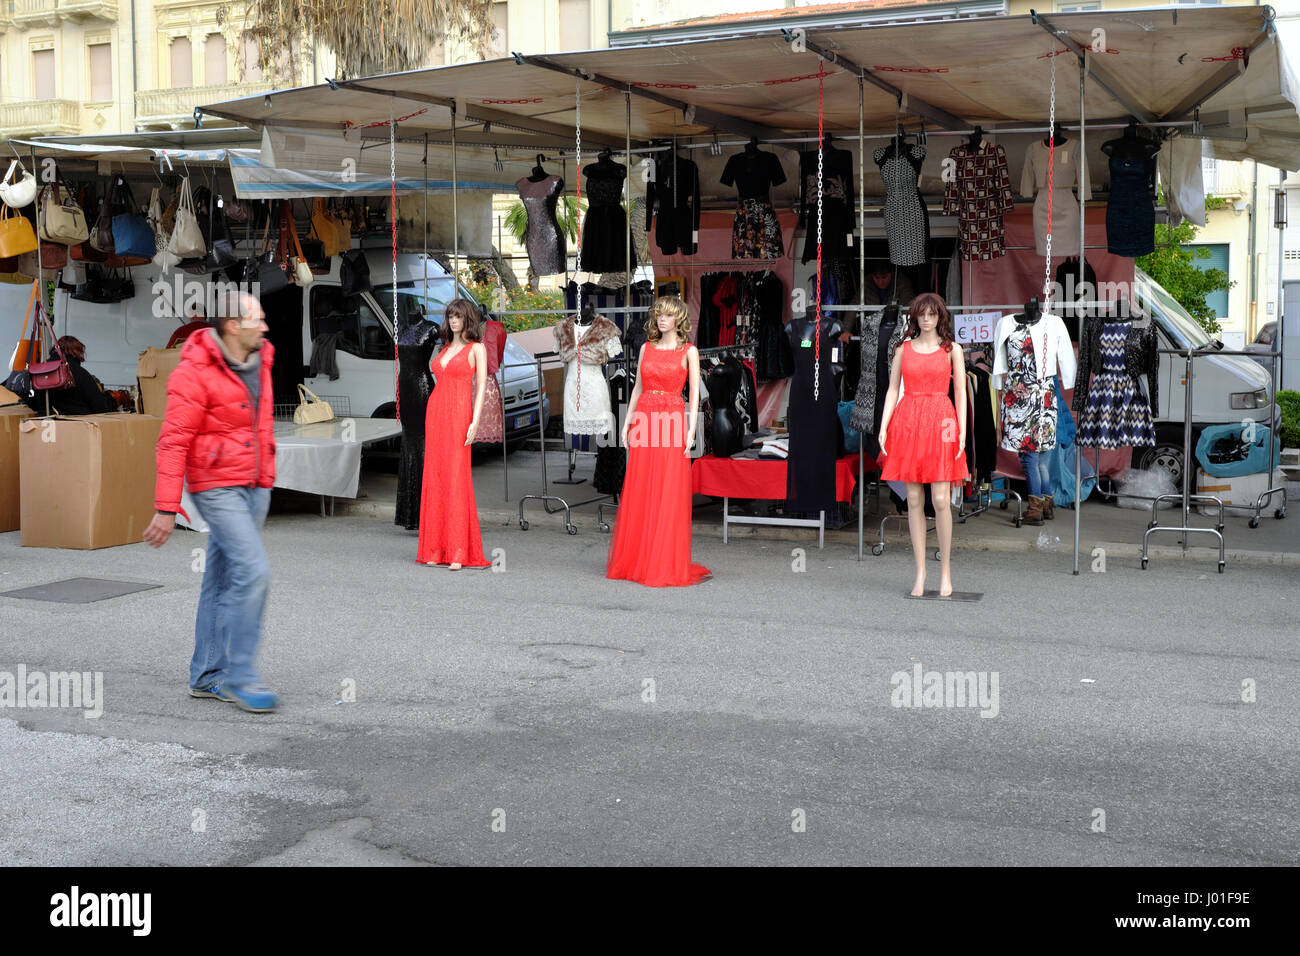 Three mannequins in red dress and man in red down jacket passing by - Viareggio street market, Tuscany, Italy, Europe Stock Photo